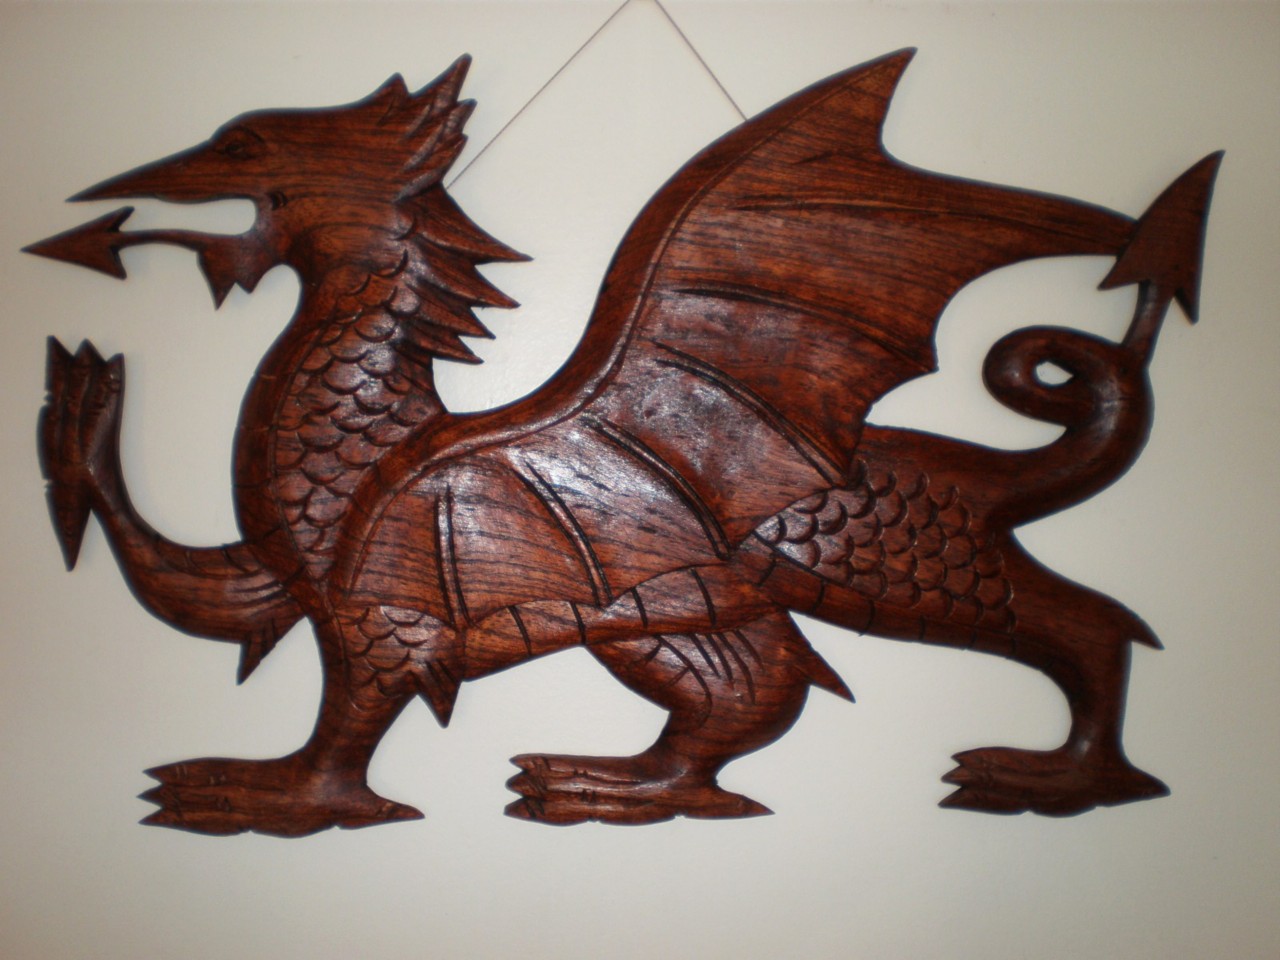 MEDIEVAL WELSH DRAGON WALL ART DECOR HANGING CARVING HAND CARVED WOOD BALINESE eBay